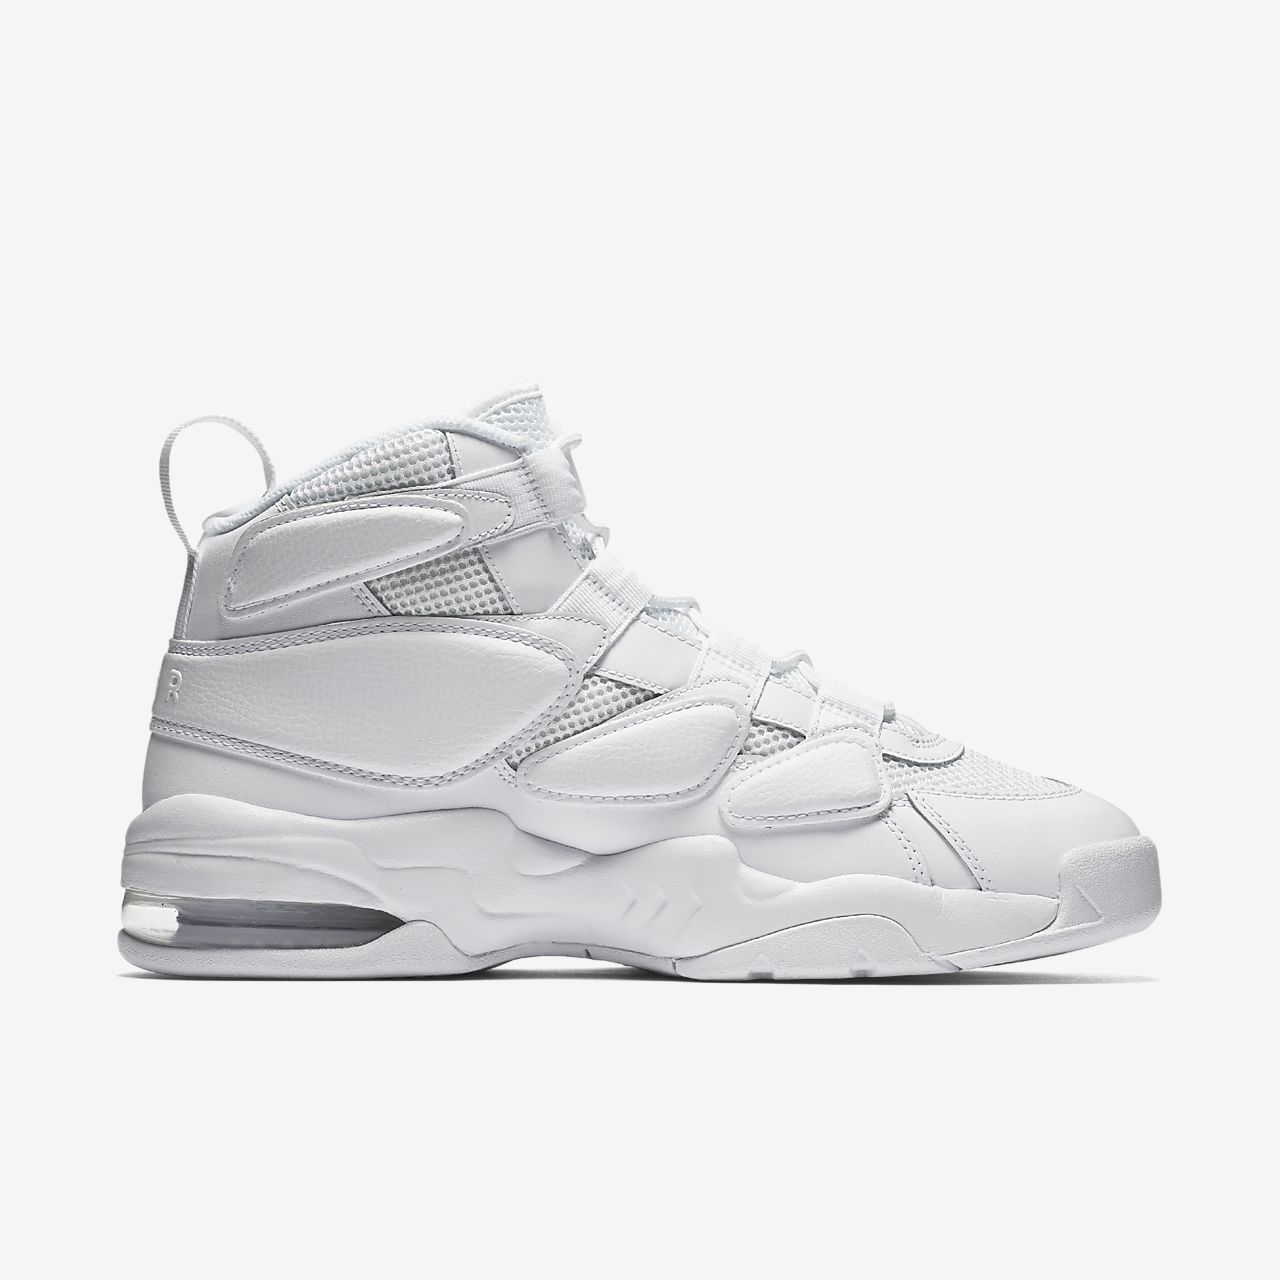 Chaussure Nike Air Max 2 Uptempo 94 pour Homme - Blanc